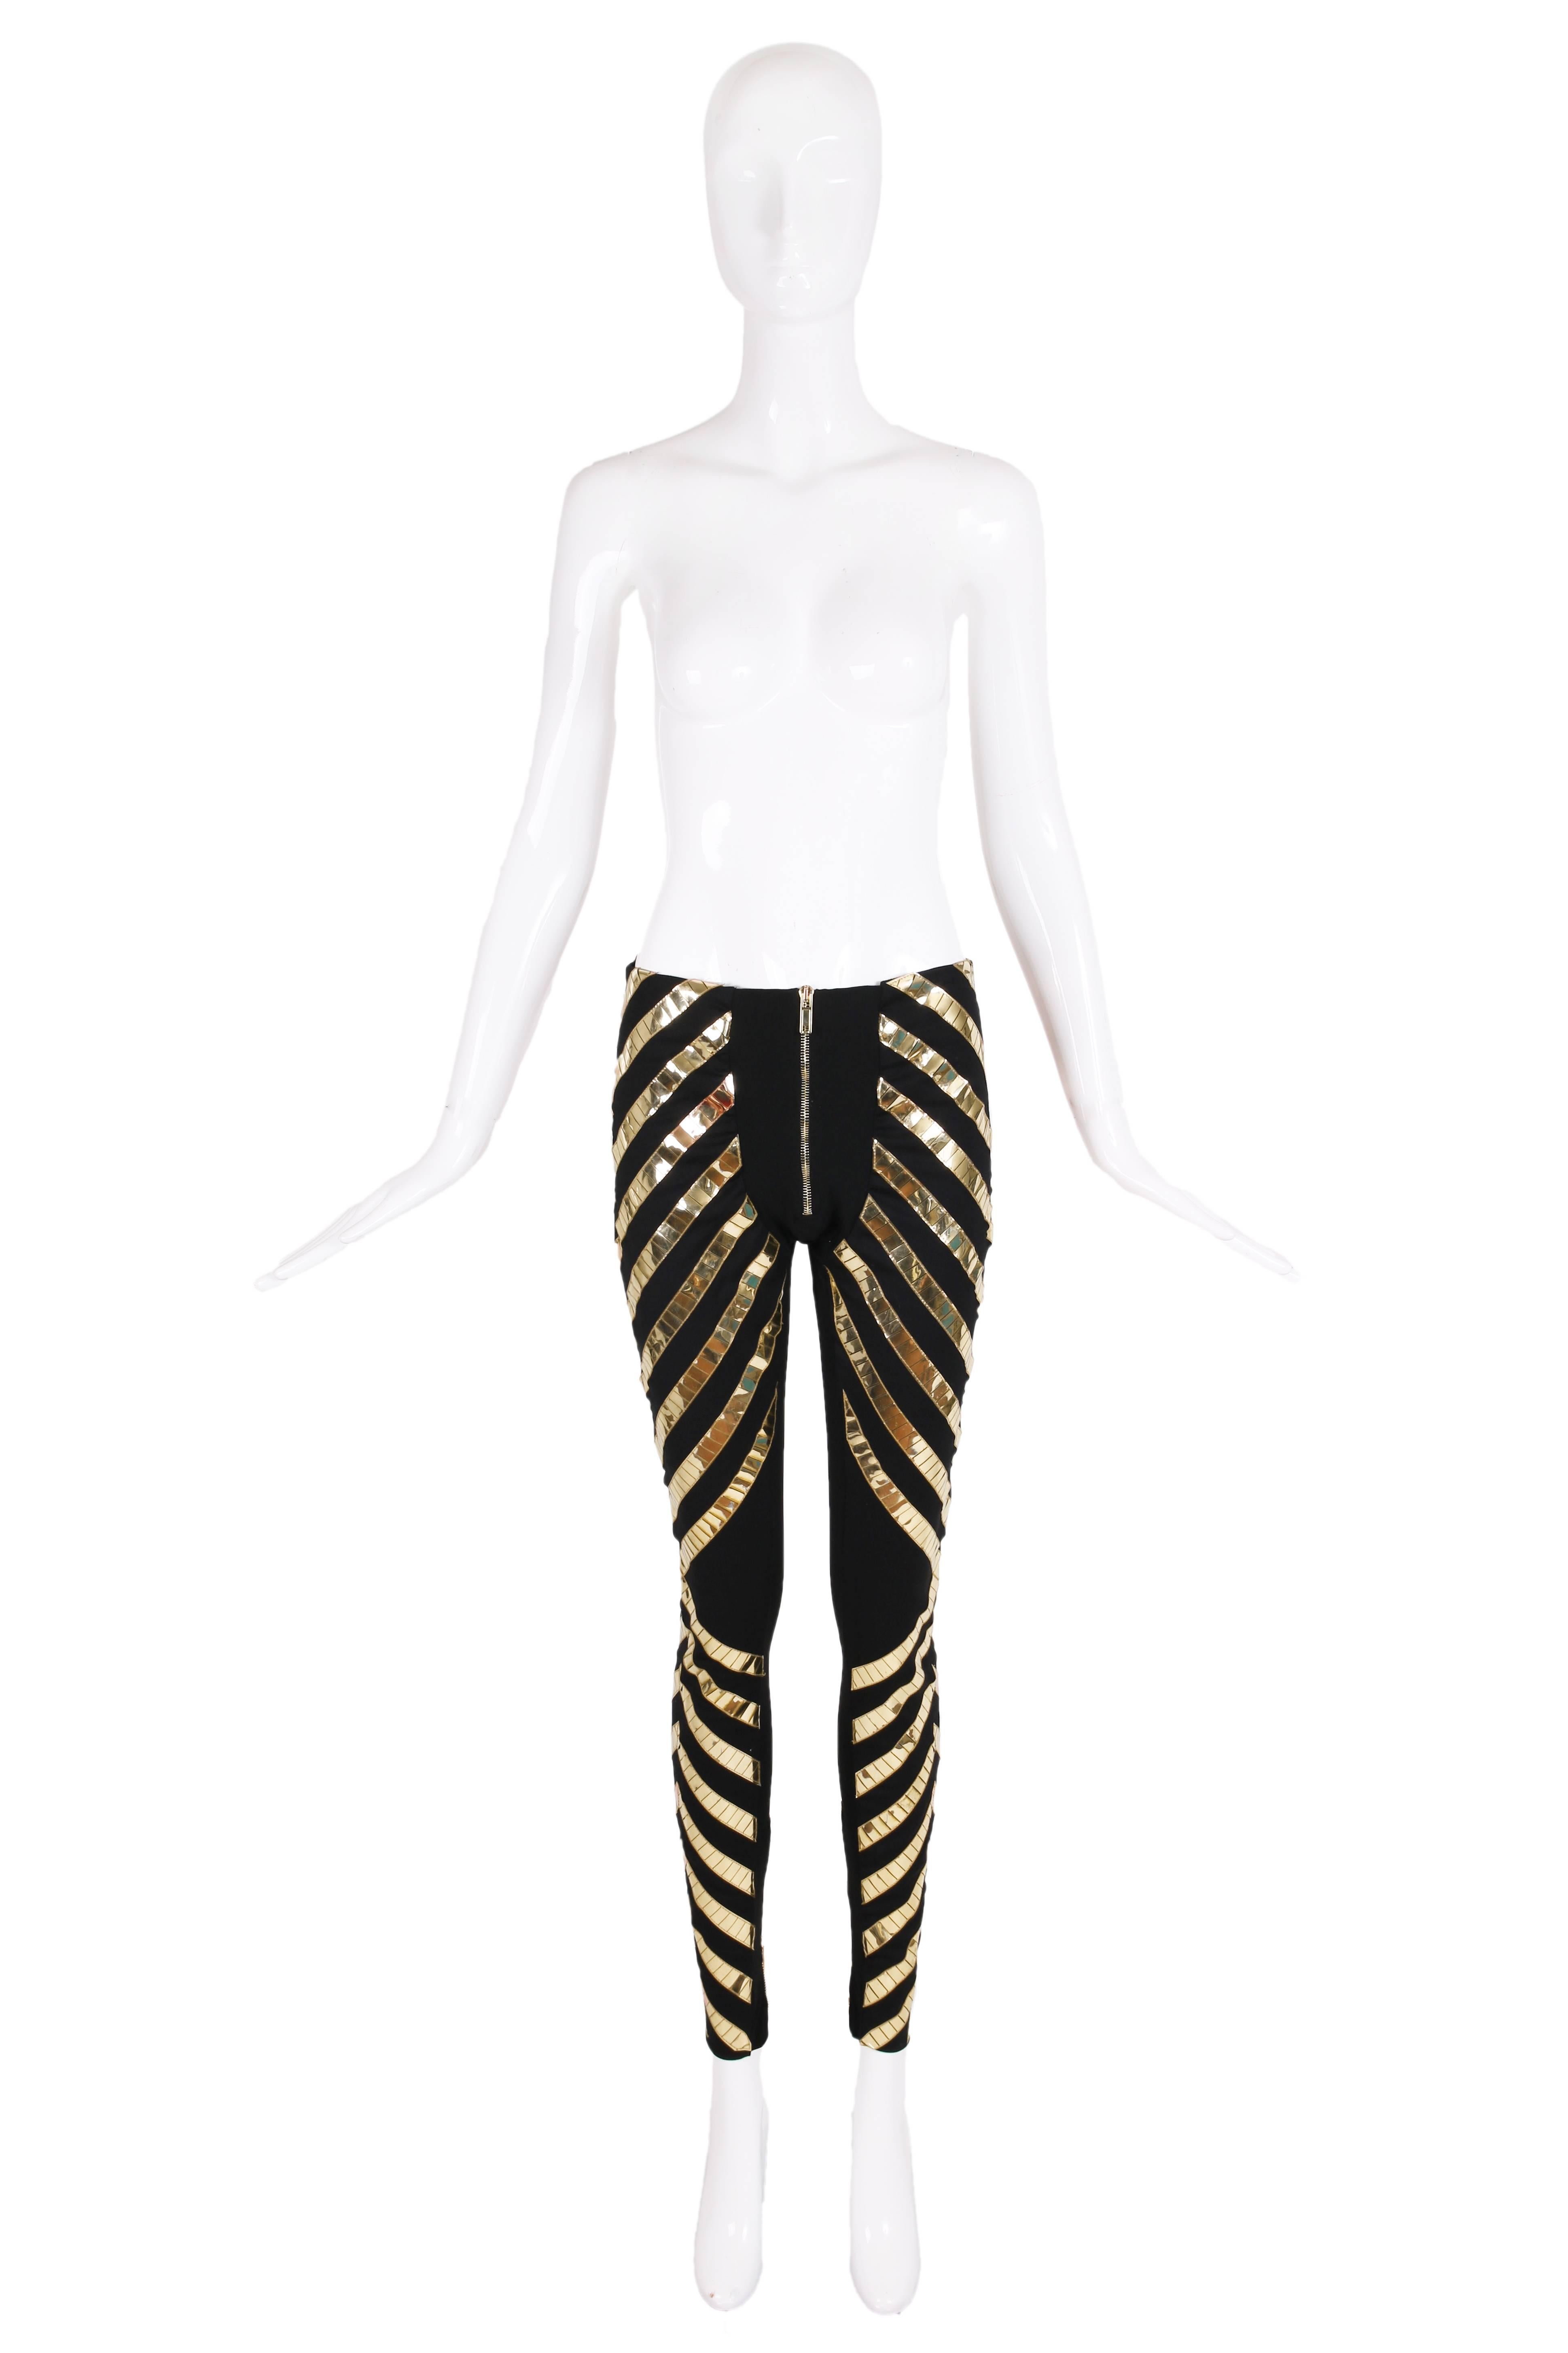 2011 Gareth Pugh black stretch pants with gold vinyl or plastic angled lines - made of small rectangular gold pieces. See original runway photo. In excellent condition - US size 8.
MEASUREMENTS:
Waist - 28"
Inseam - 28.5"
Hips -